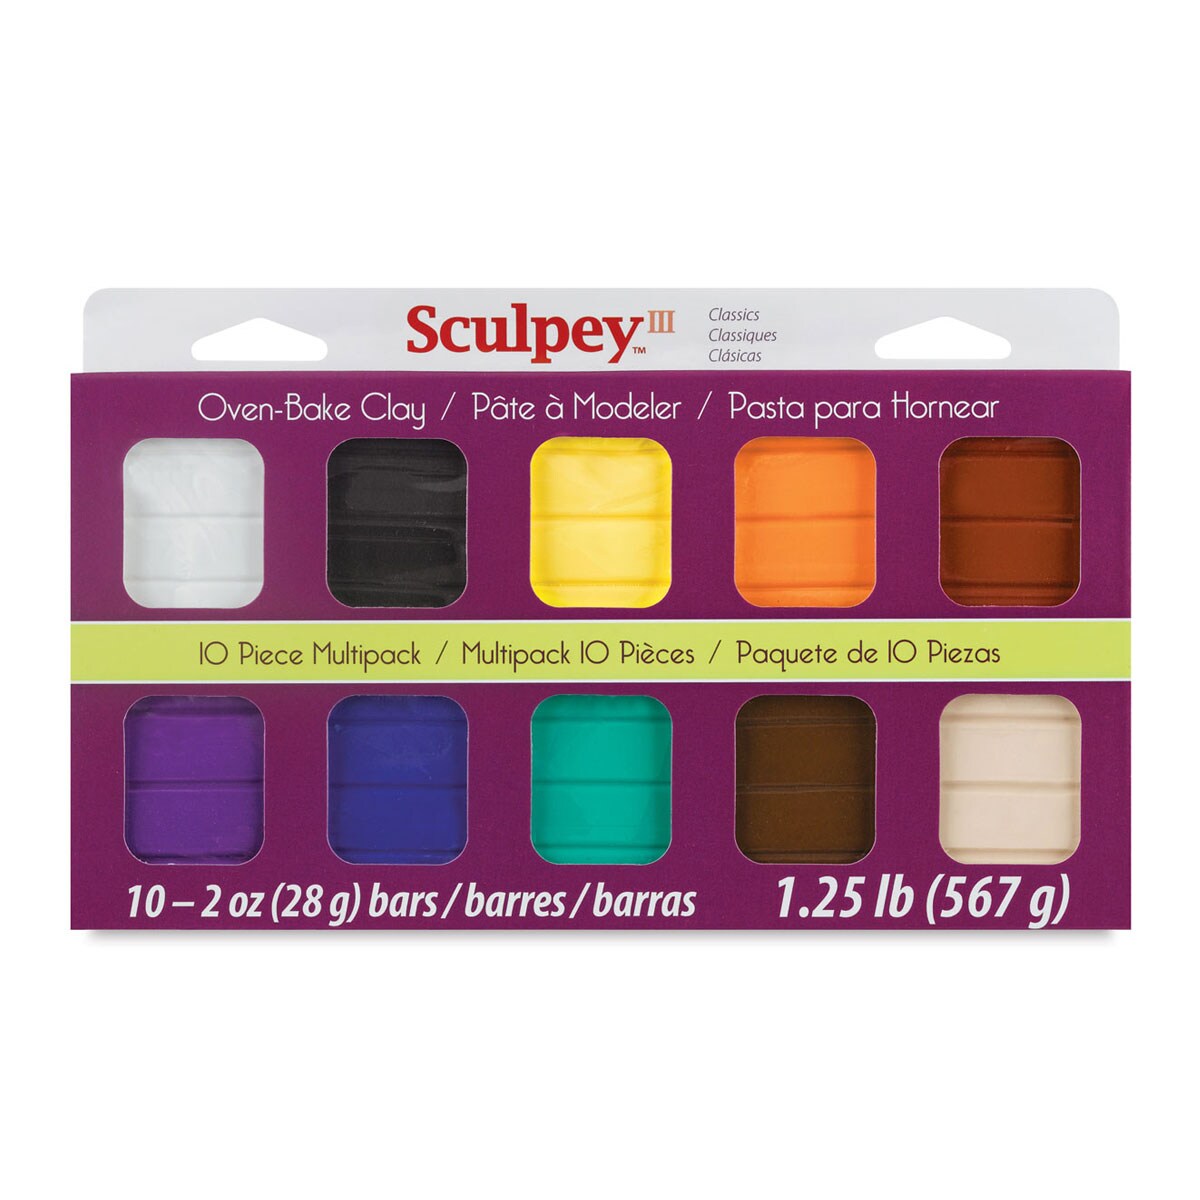 Sculpey III Set - Classic Collection, Set of 10